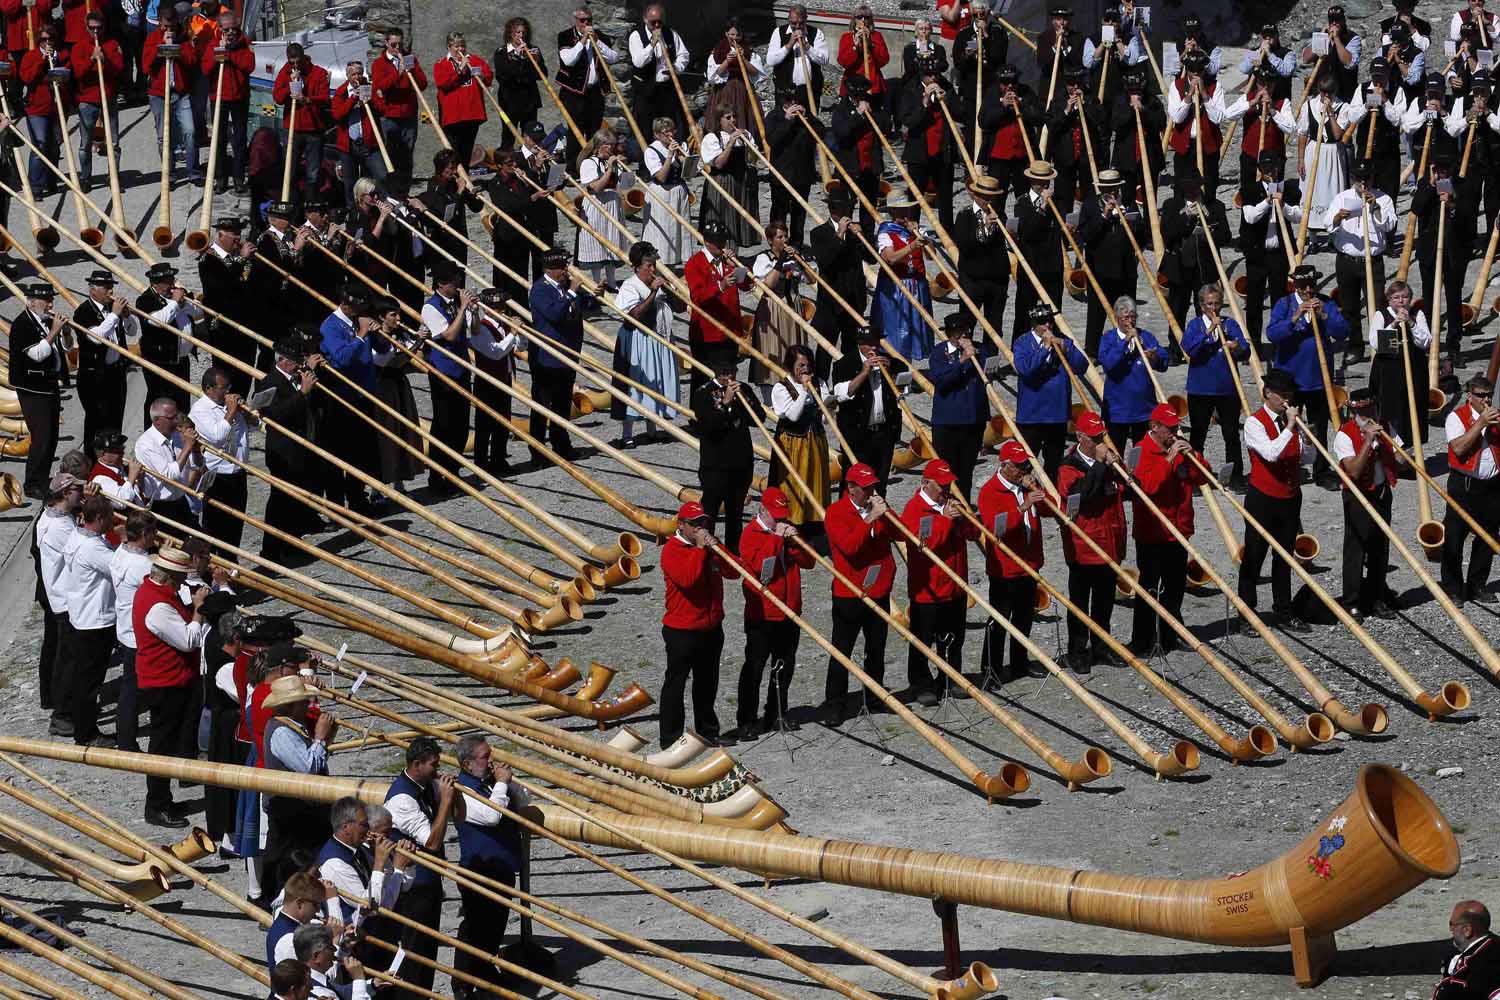 Alphorn players blow their instruments to break the world record for the largest ensemble of people playing the alphorn, on the Gornergrat in front of the Matterhorn mountain near Zermatt